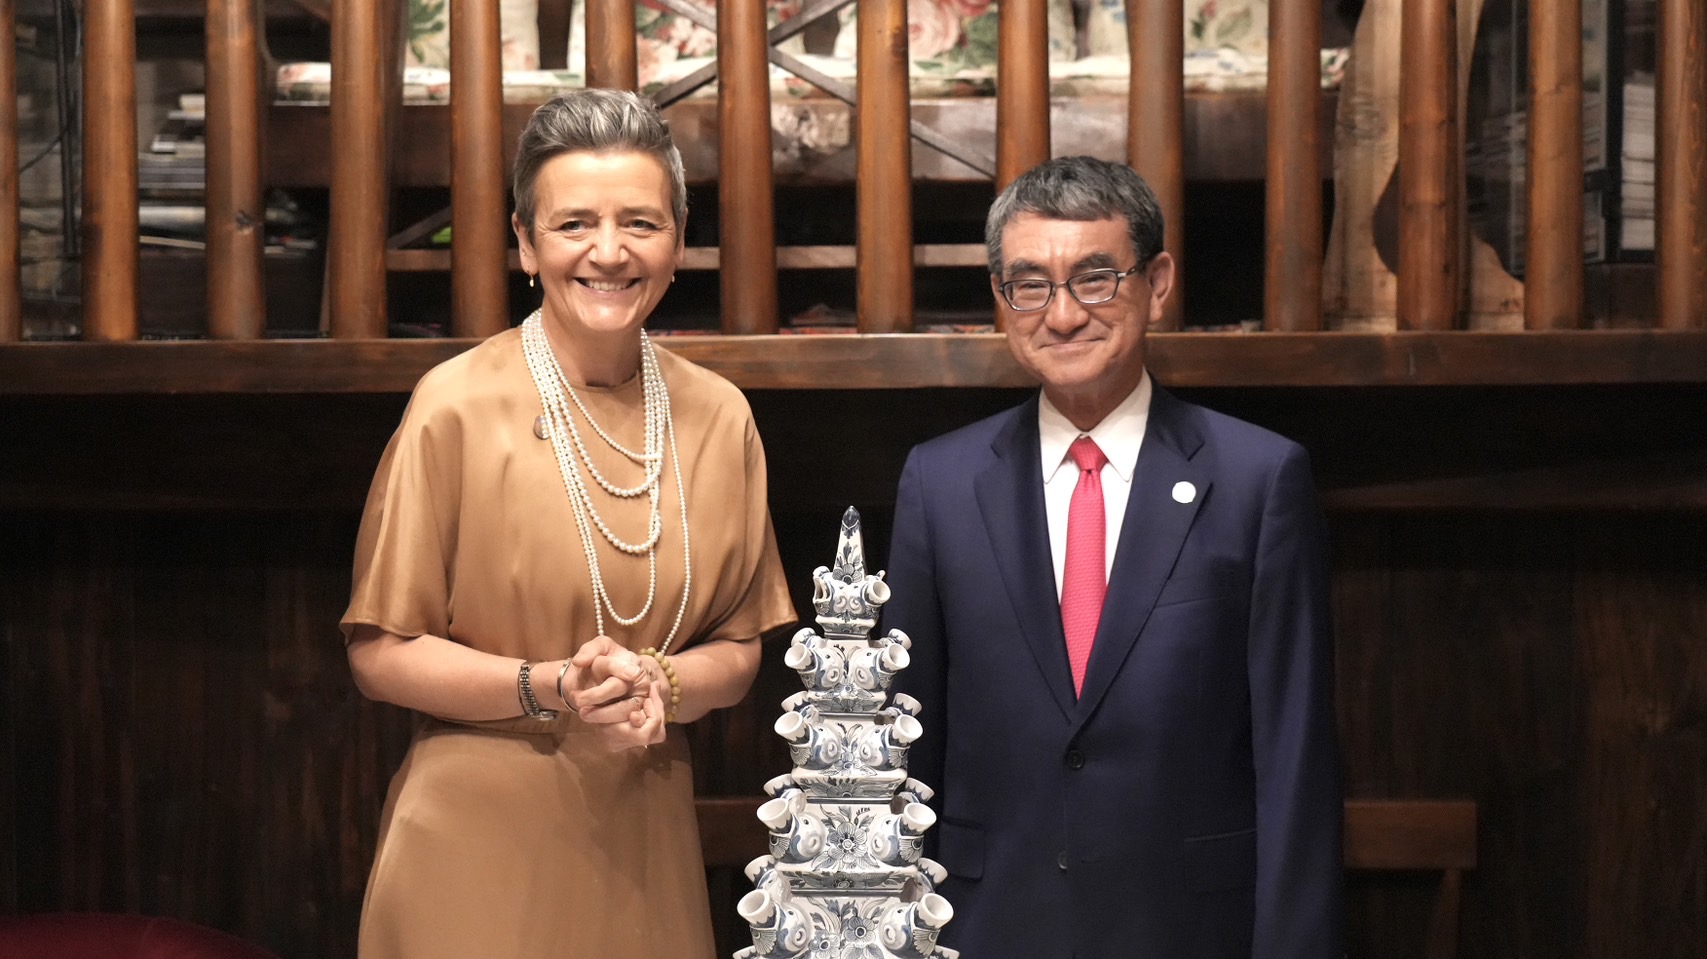 Photo with Ms. Vestager, the Executive Vice-President of the European Commission. Minister Kono stands on the right.